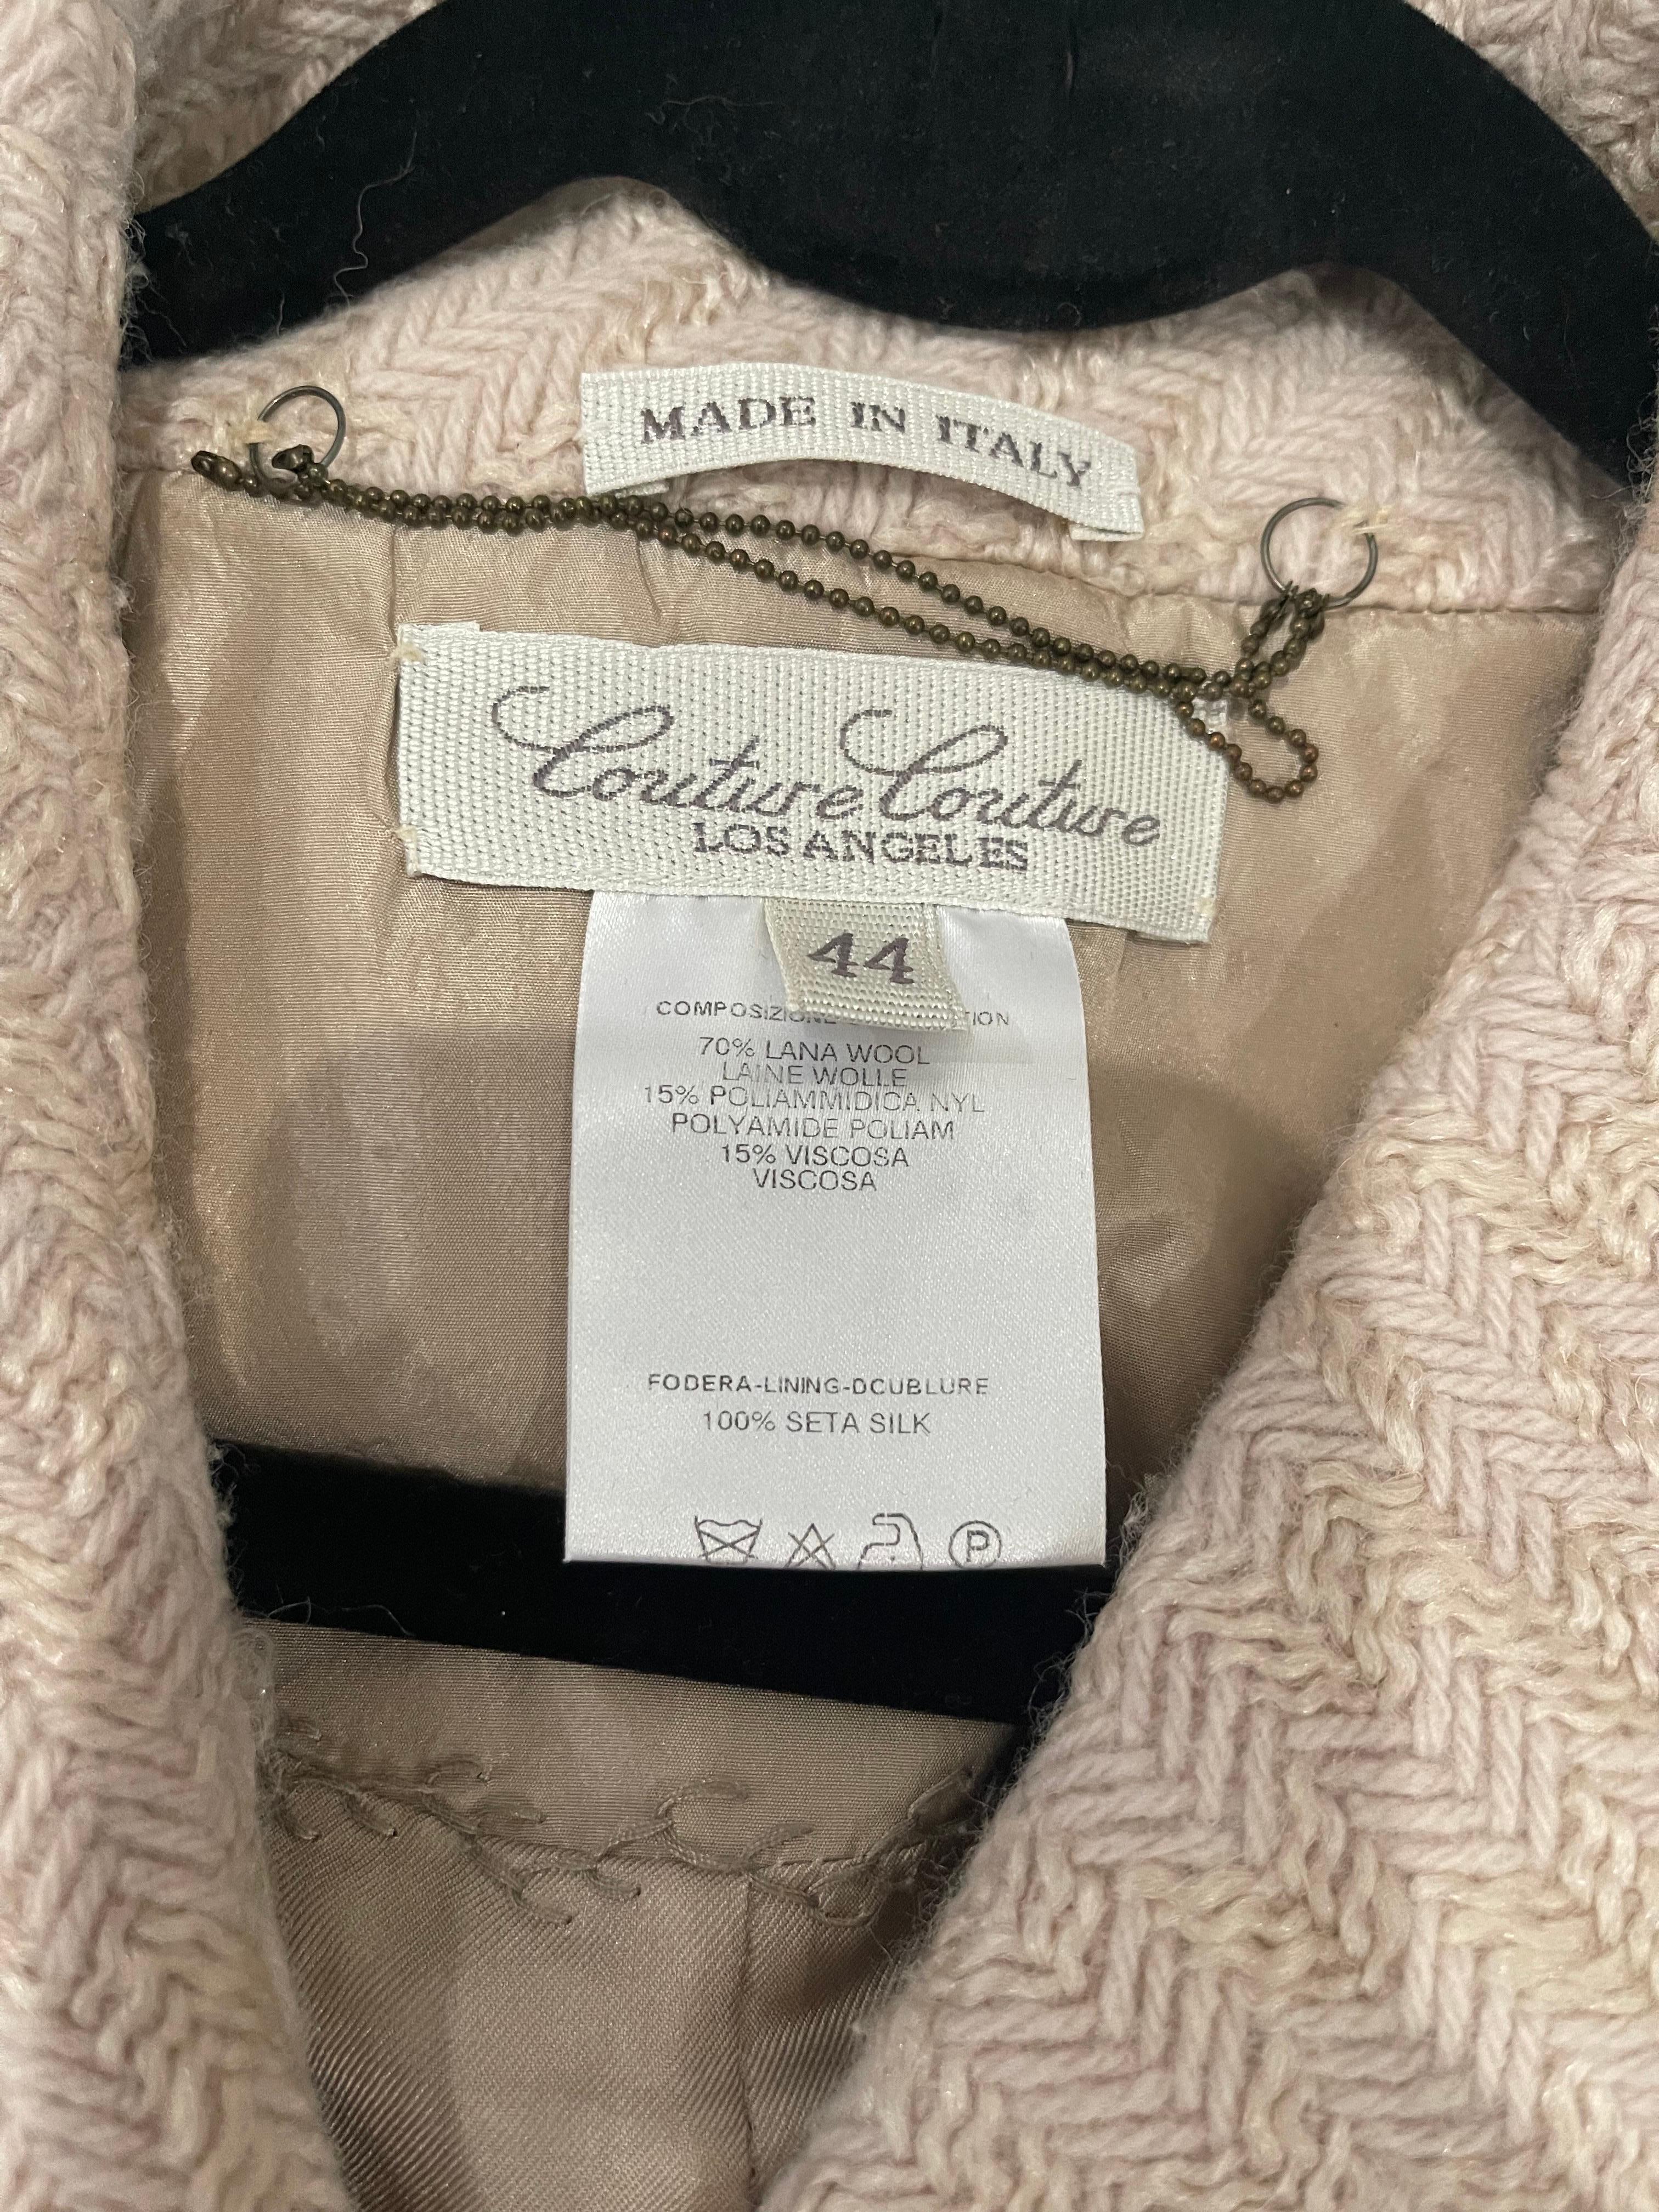 Chic never worn Couture Couture Los Angeles ivory / off white jacket ! Features a soft wool and rayon blend. Four snaps up the front with two fabric covered oak buttons. Pockets at each side of the waist. Lined in a beautiful flower printed silk.